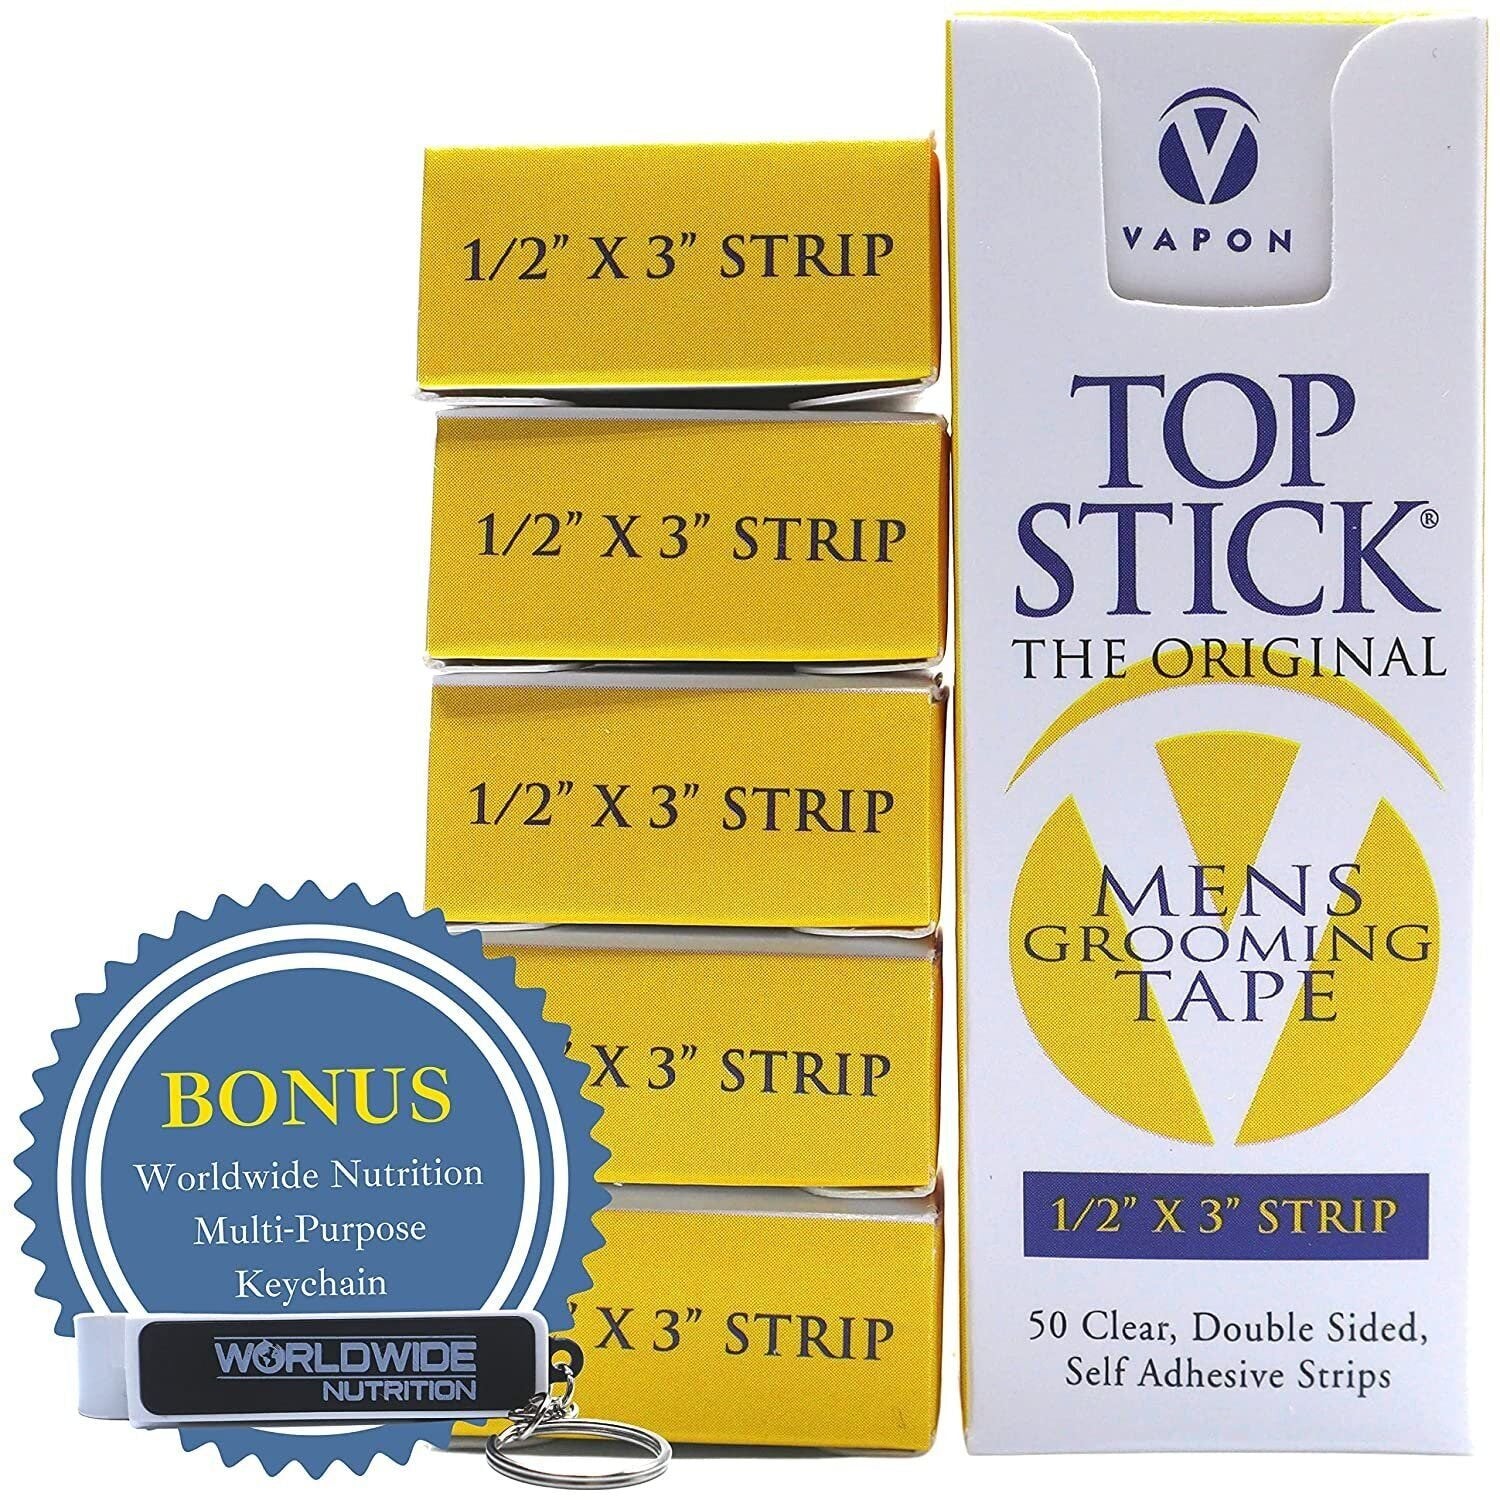 Vapon Topstick The Original Men's Grooming Tape for Toupee or Hairpiece - Clear